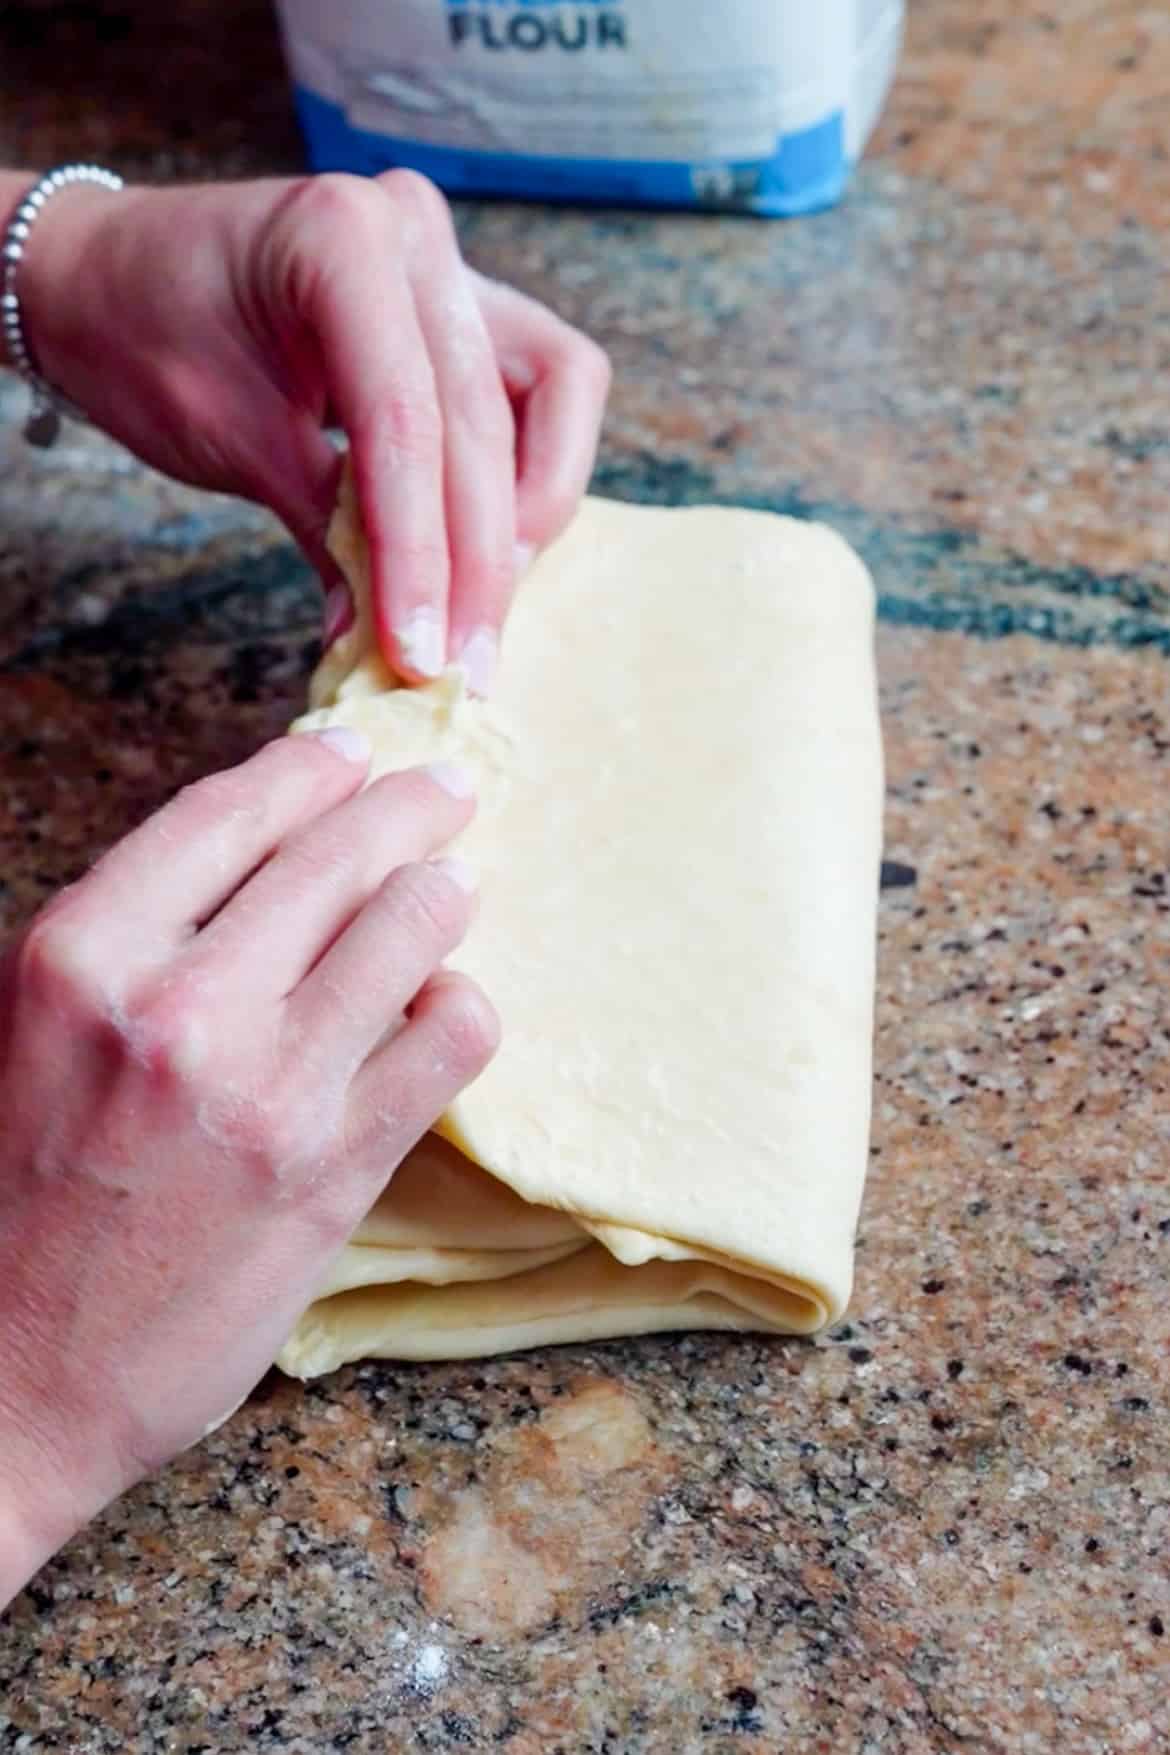 On a lightly floured work surface, use a floured rolling pin to roll out the dough to a rectangle roughly 8" x 15" in size and about ⅛" thick, with the short side facing you. Fold the dough like a business letter, bringing the bottom third of the dough up and the top third of the dough down and over the top; this is called a letter fold. This is your first turn.  Rotate the dough 90° (a quarter turn), then repeat the rolling and folding process. As you work, dust the work surface, your hands, and the rolling pin with flour as necessary to prevent sticking. If the dough starts to soften at any point, refrigerate it briefly and then continue. Wrap the dough and refrigerate it for at least 1 hour and up to 3 hours. Repeat the rolling and folding process one more time (for a total of 3 turns), then wrap the dough well and refrigerate it overnight, or at least 8 hours. 